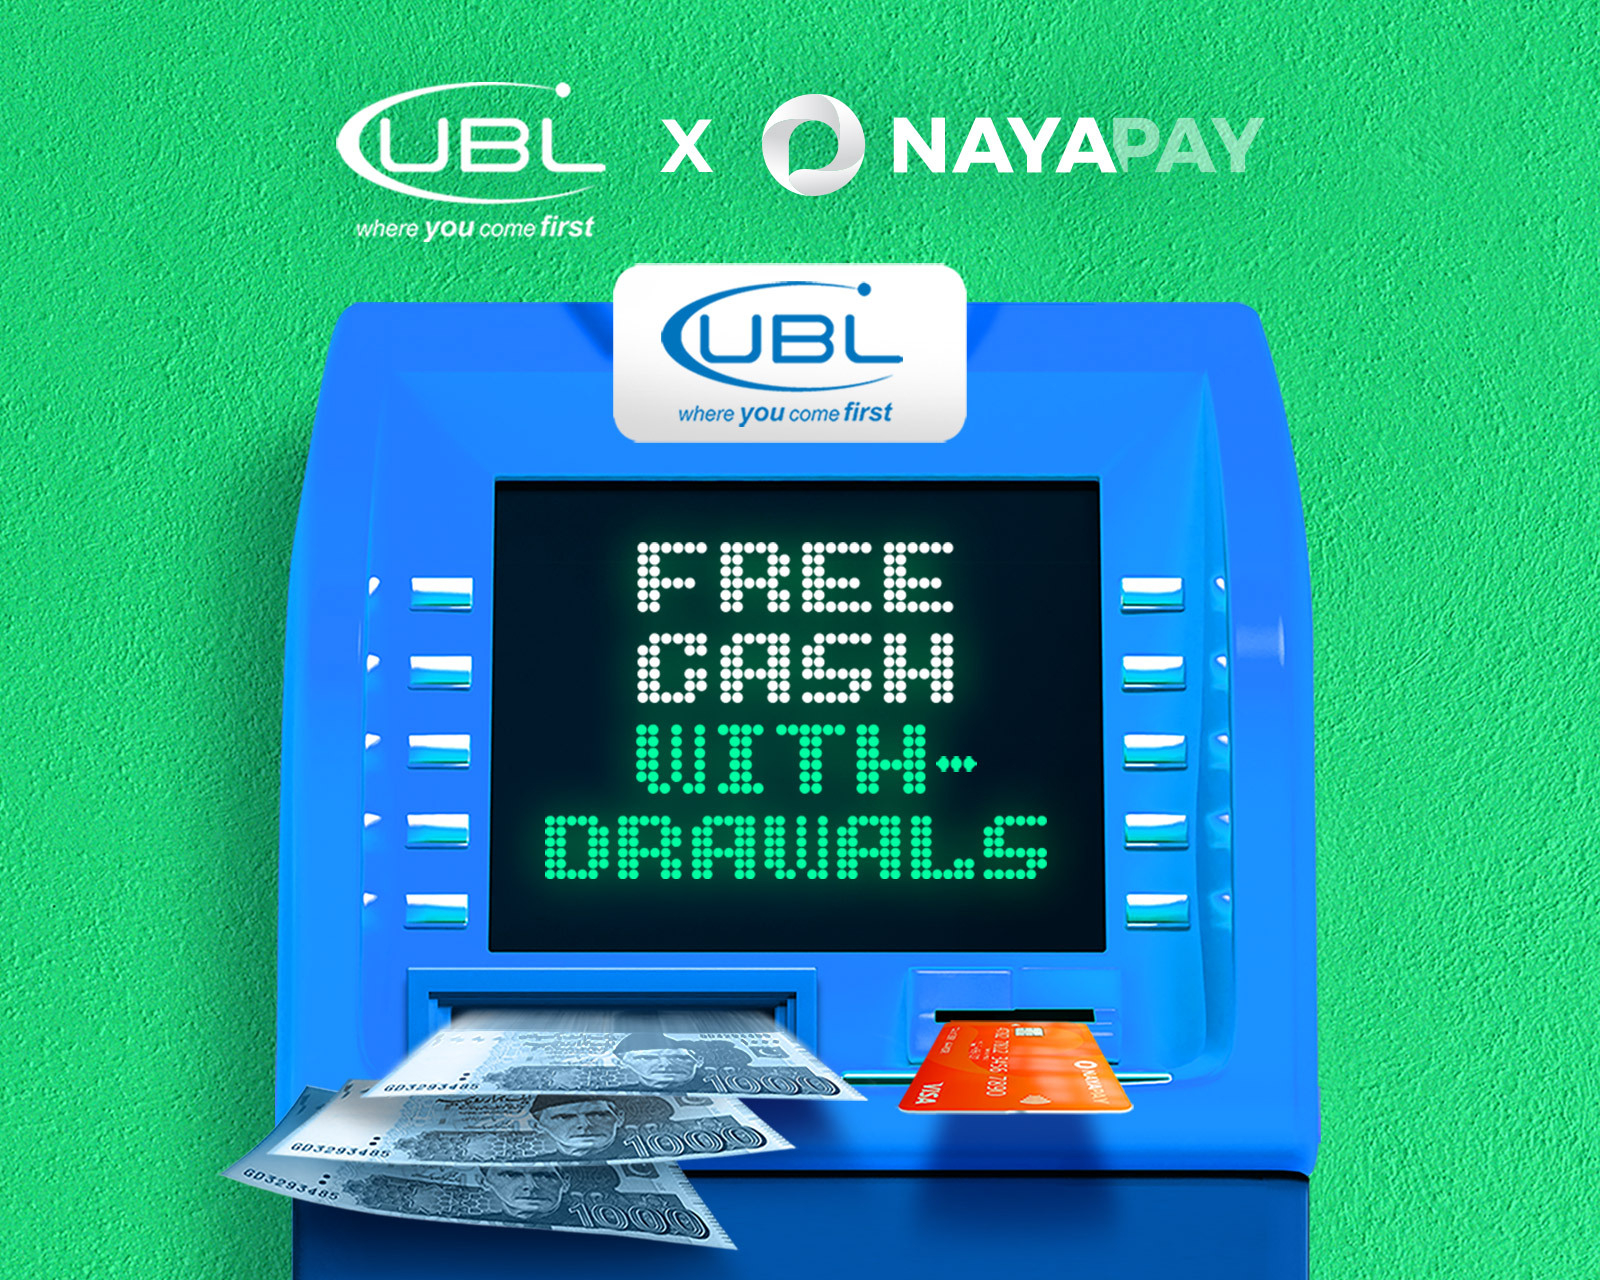 Enjoy 5 FREE withdrawals every month at UBL ATMs